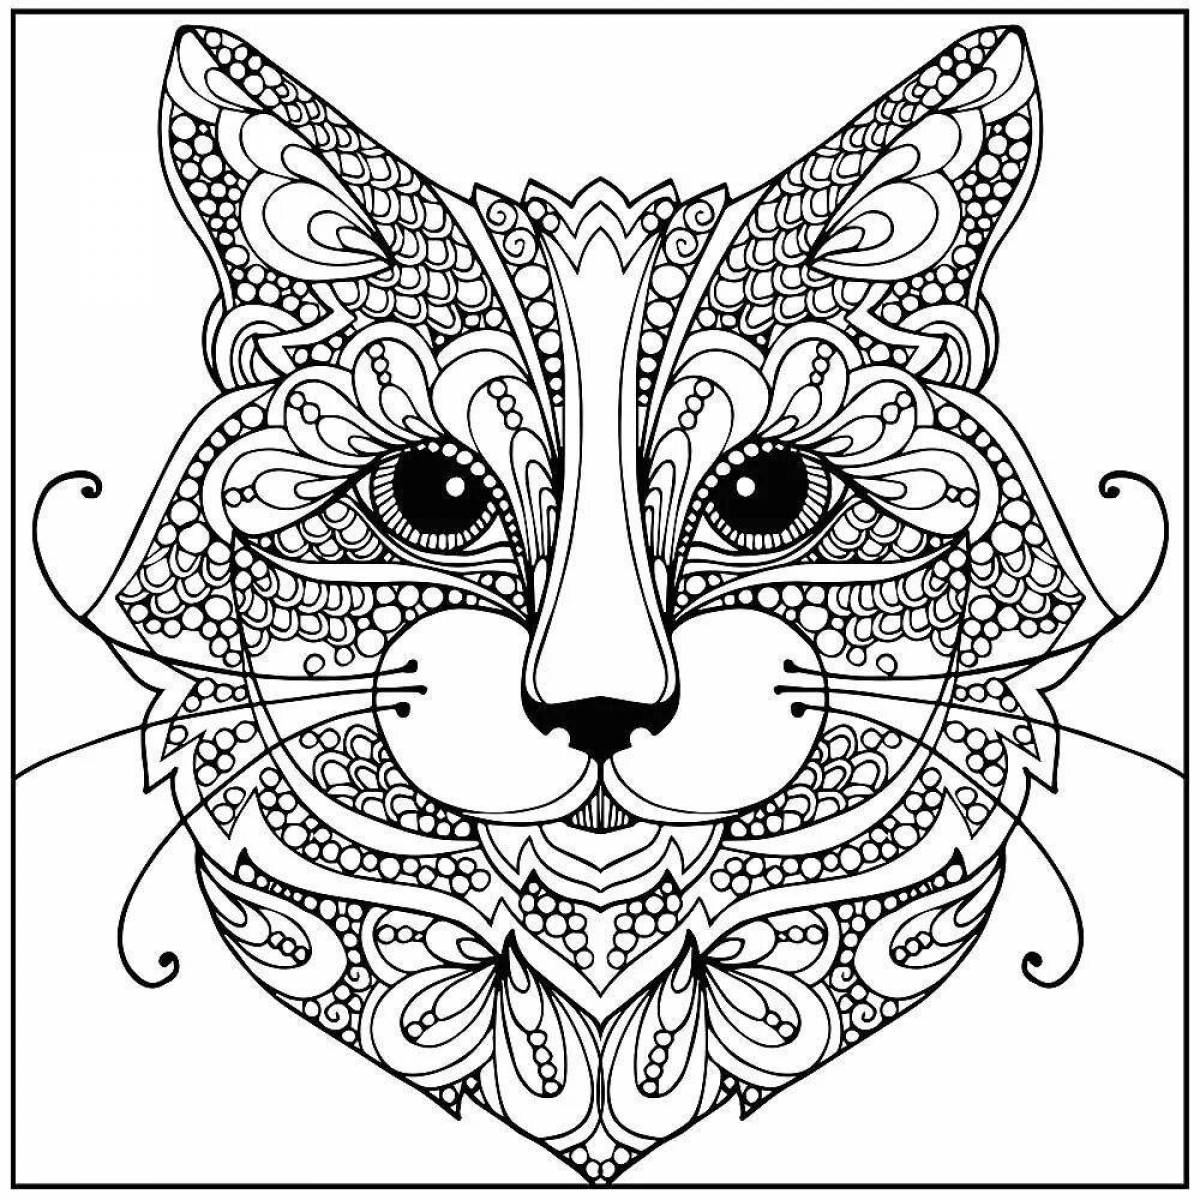 Adorable lung adult coloring page